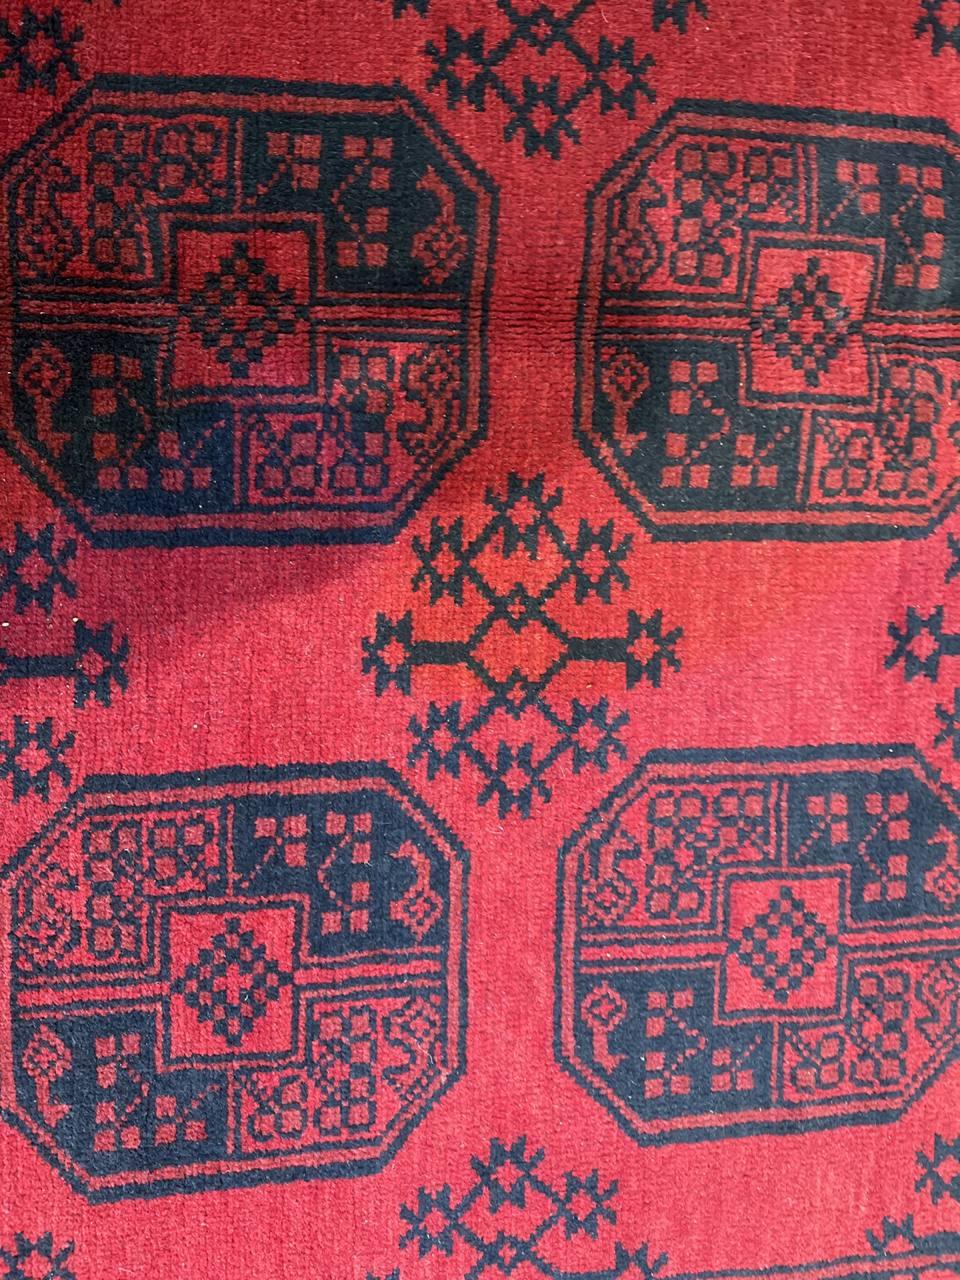 Fine quality handmade Afghan Red rug featuring Gul motifs and framed by richly ornamented borders.
This Turkman Rug is created using the art of knotting from the Ersari from the past century. The Ersari, Turkmen nomads from the north of